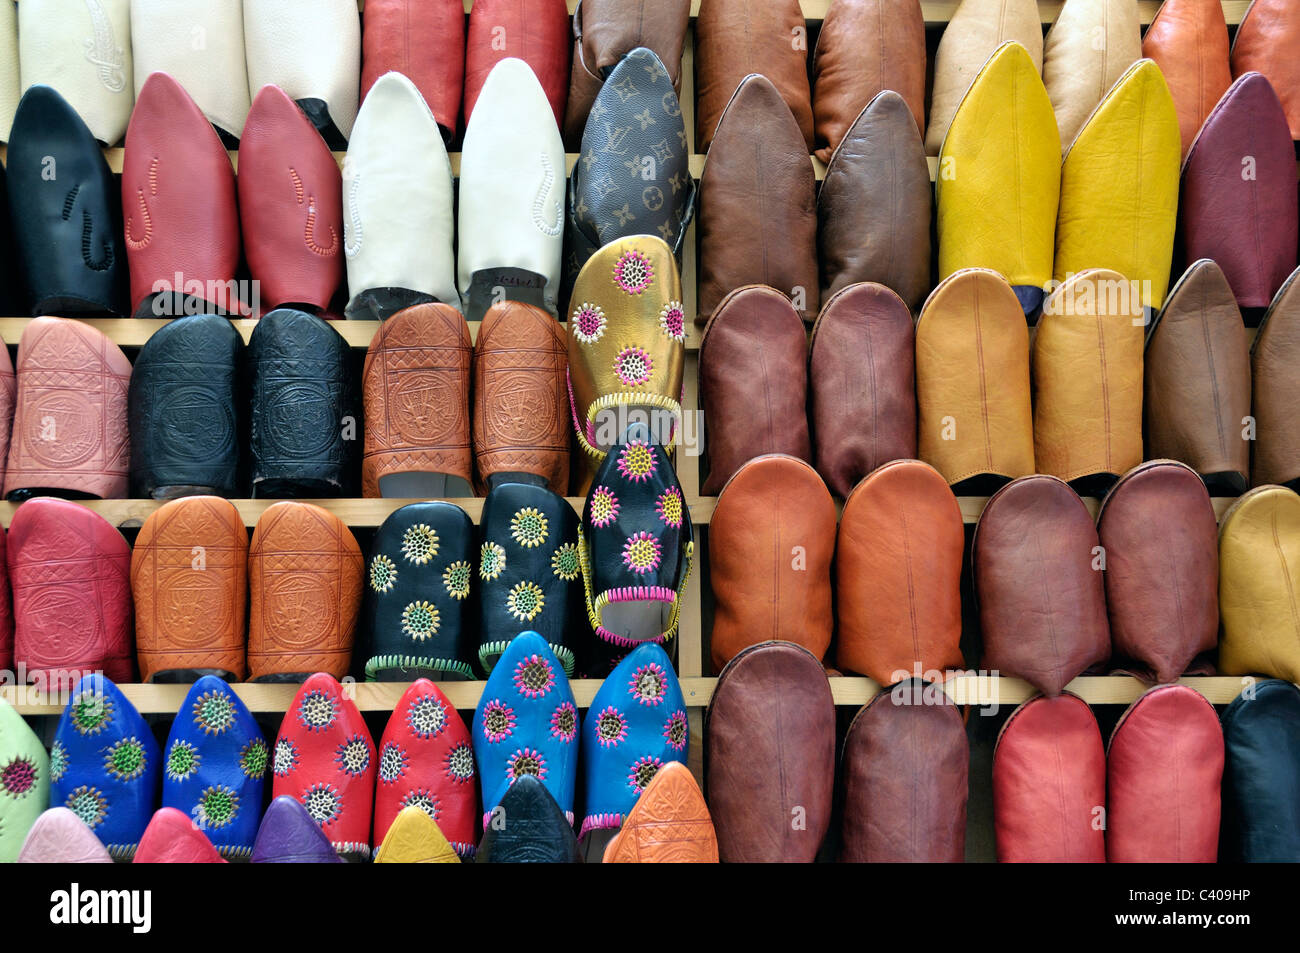 Africa, North Africa, Fez, called, mentioned, Moroccan, Morocco, shoes, mules, slippers, Souk, typical, brightly Stock Photo